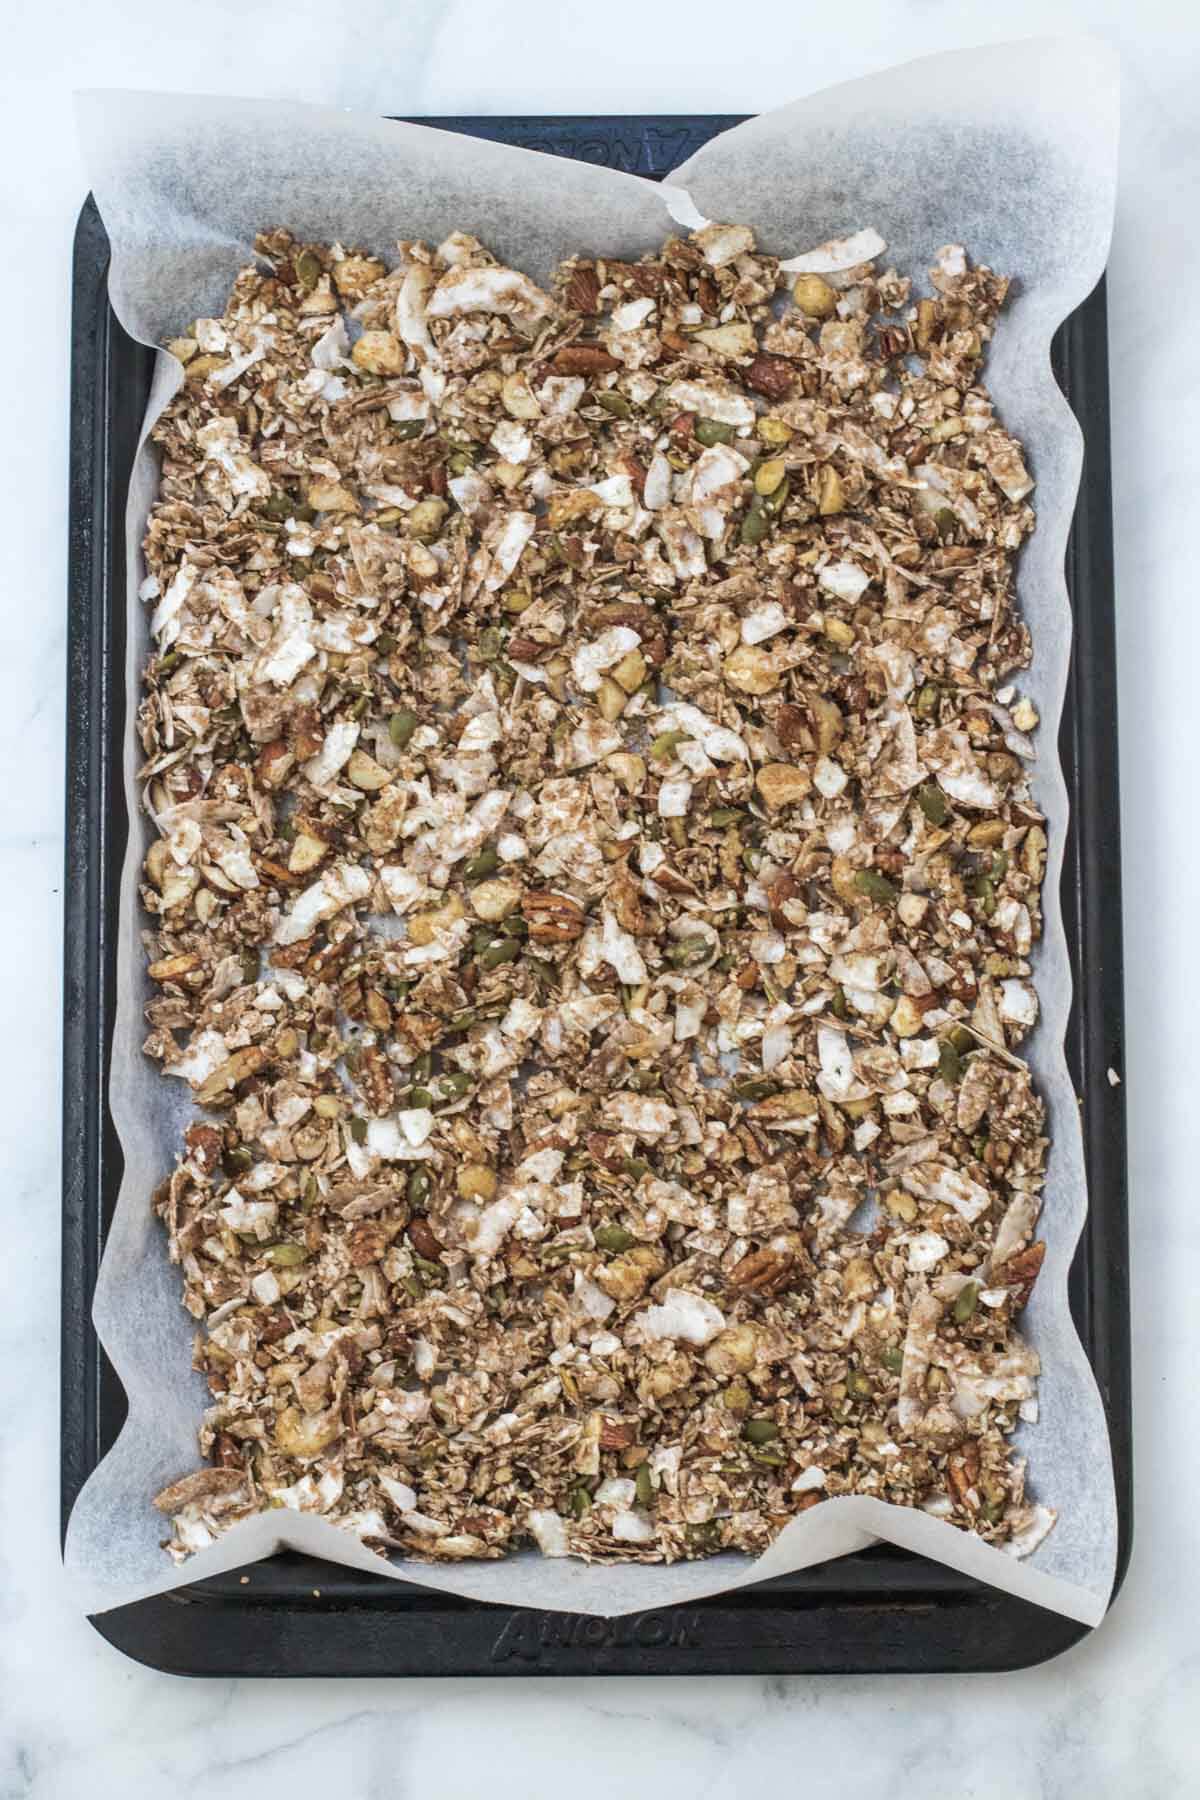 A lined tray of granola ready to go in the oven.